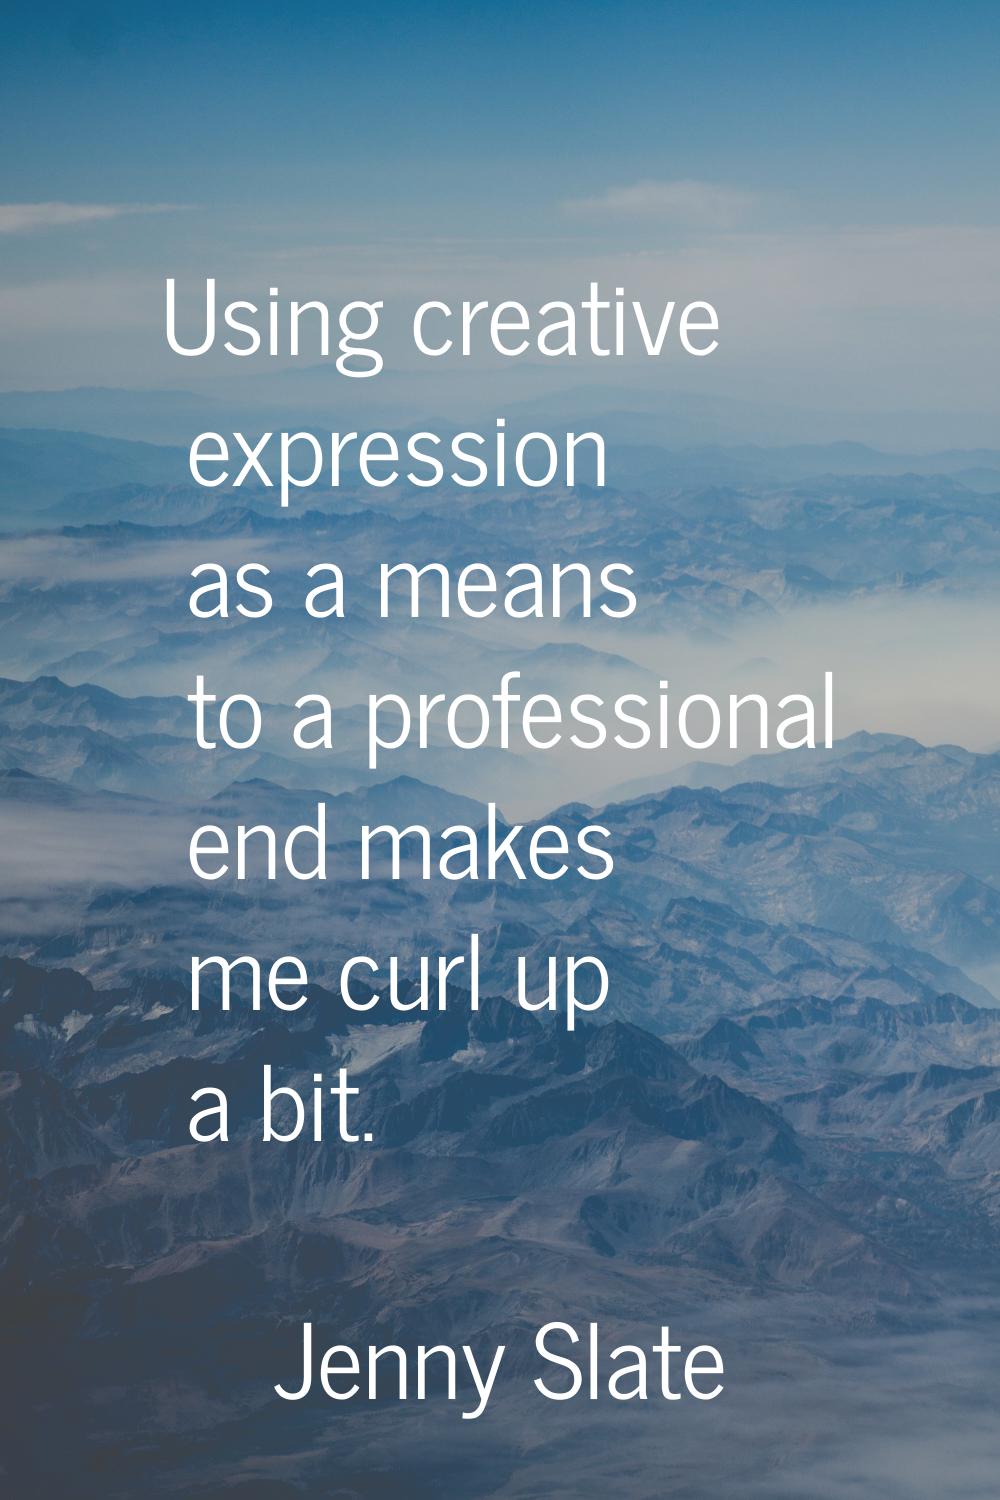 Using creative expression as a means to a professional end makes me curl up a bit.